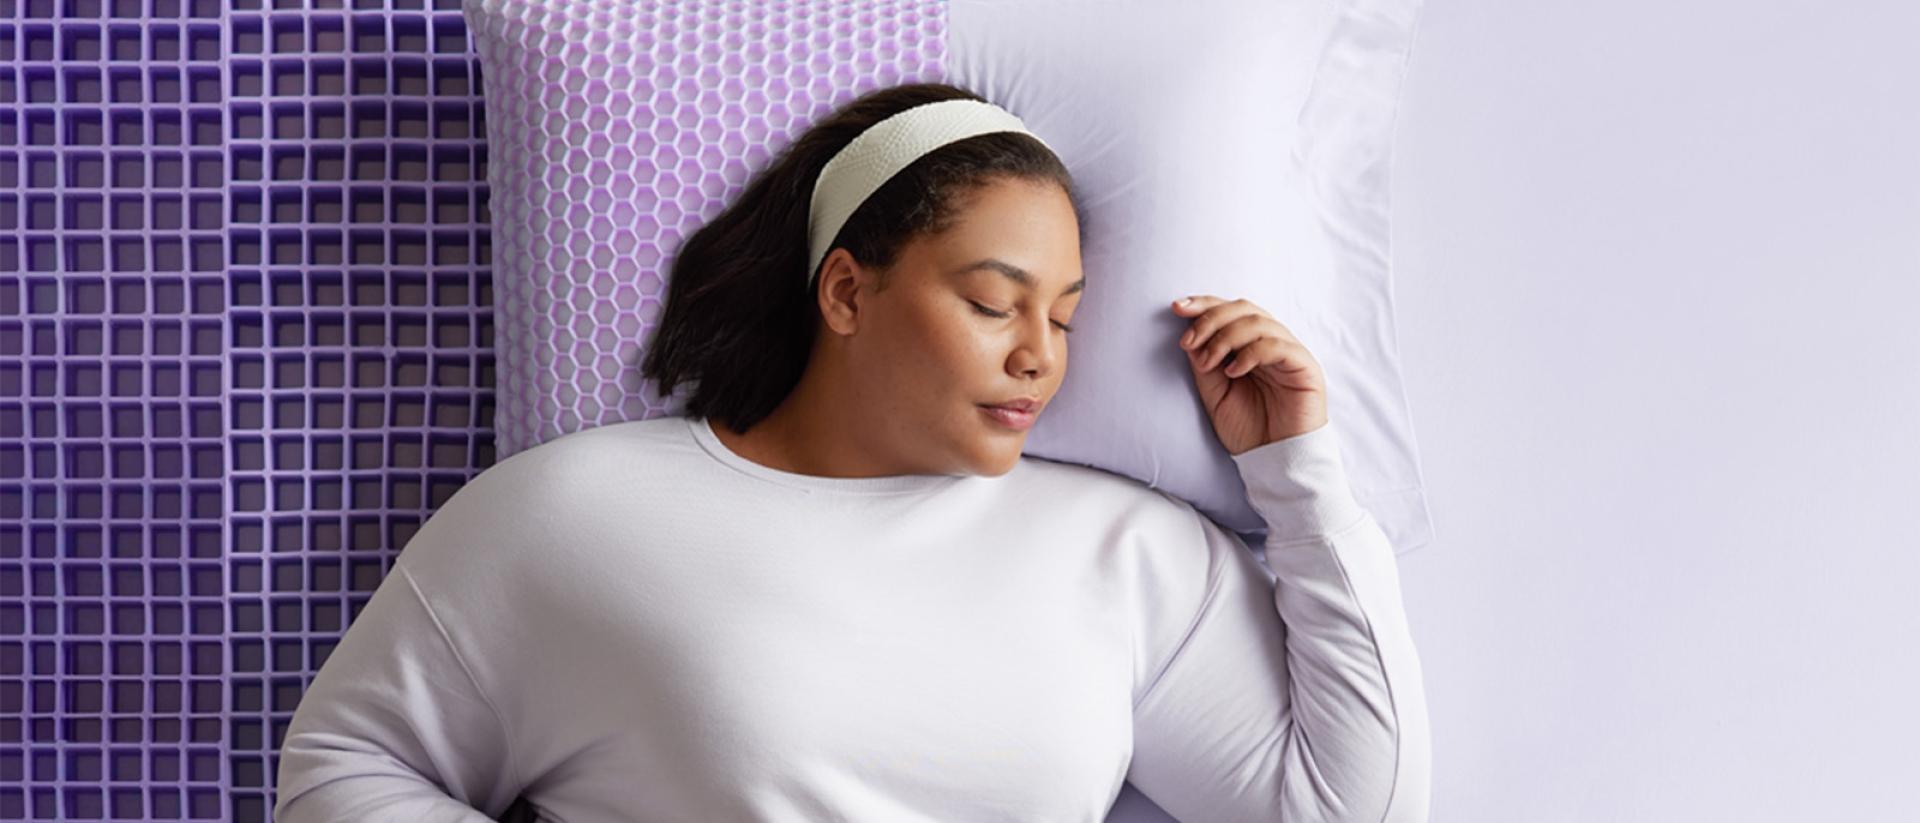 Woman on Half Exposed Grid Mattress and pillow